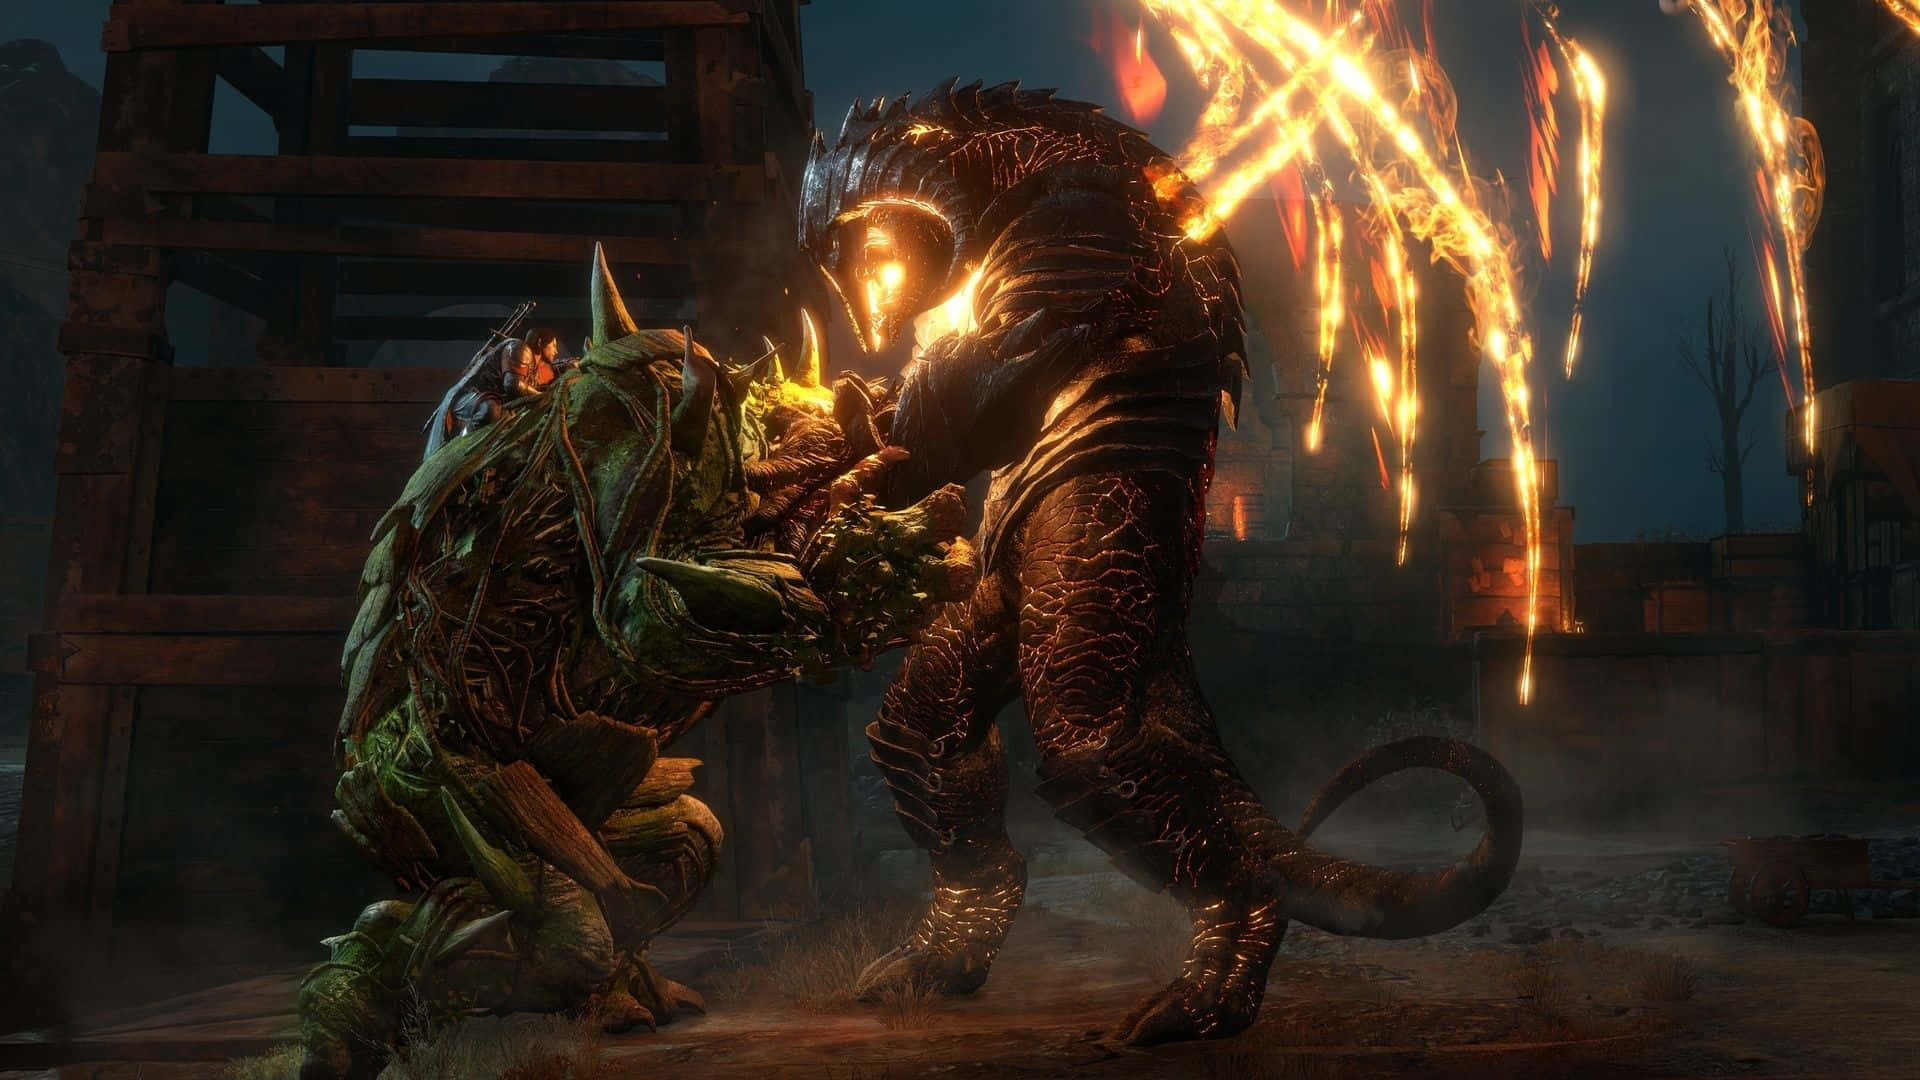 A Character Is Fighting A Creature With Fire